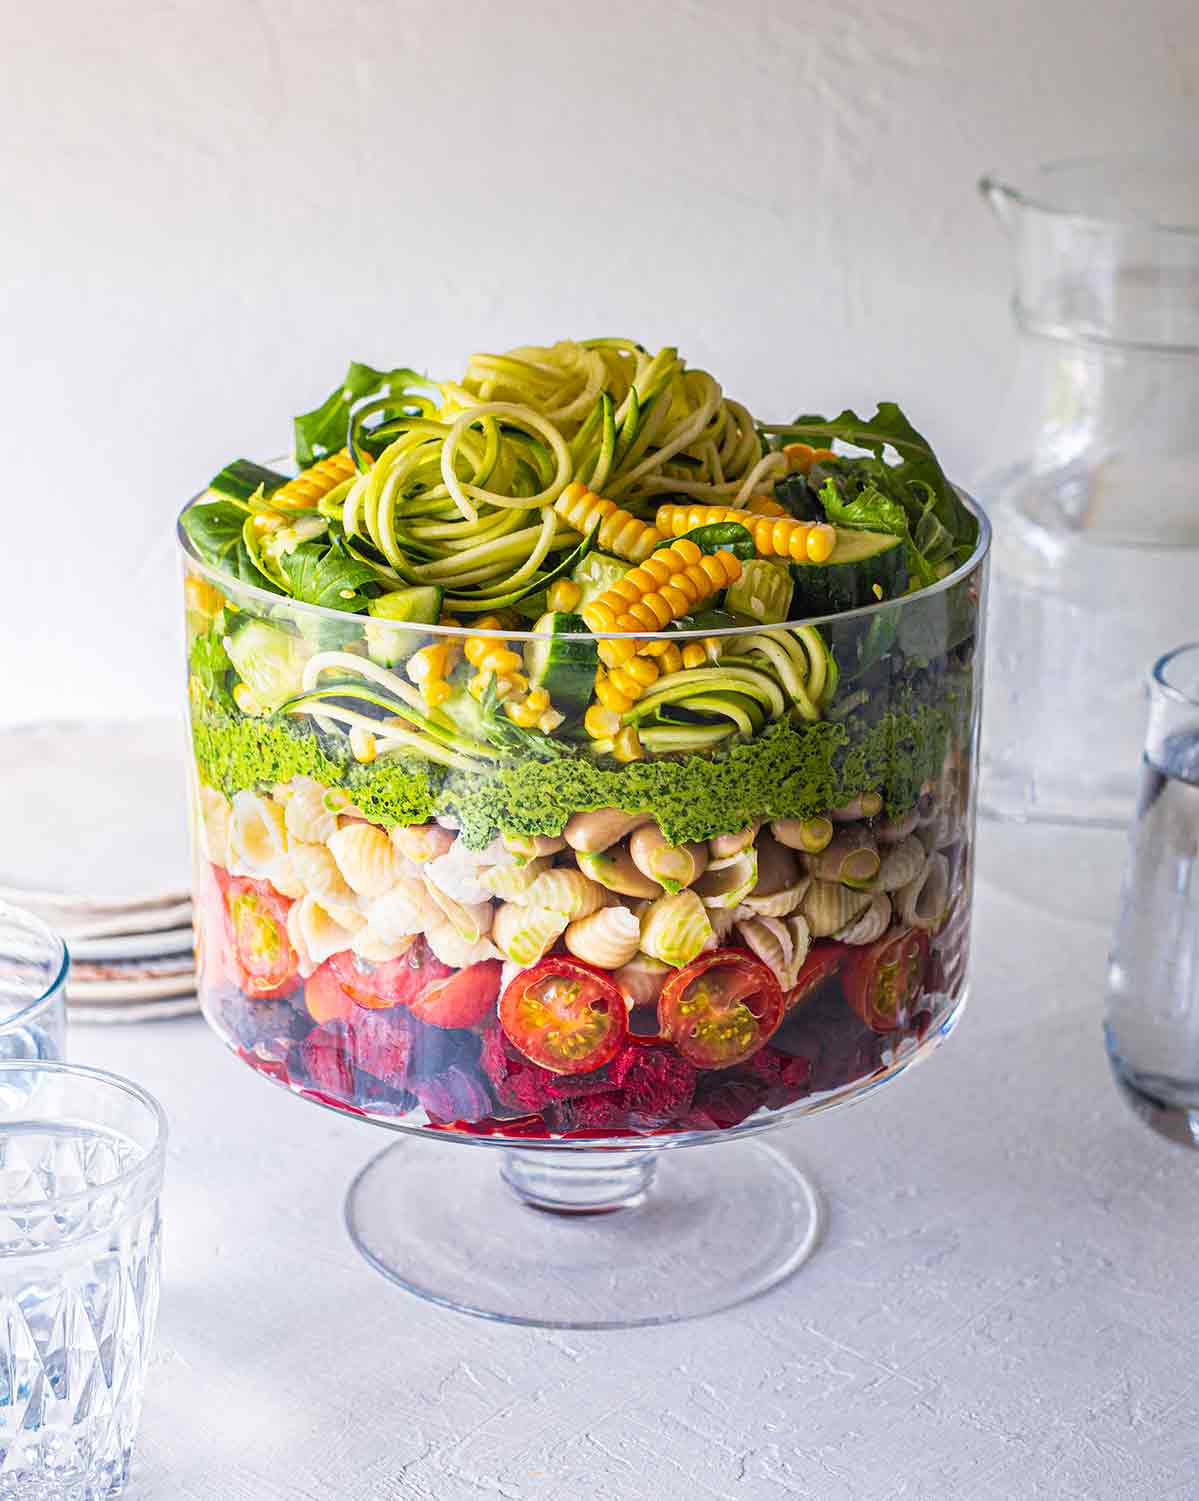 Vegan Layered Pasta Salad with Pesto in trifle glass with serving jugs and water surrounding.